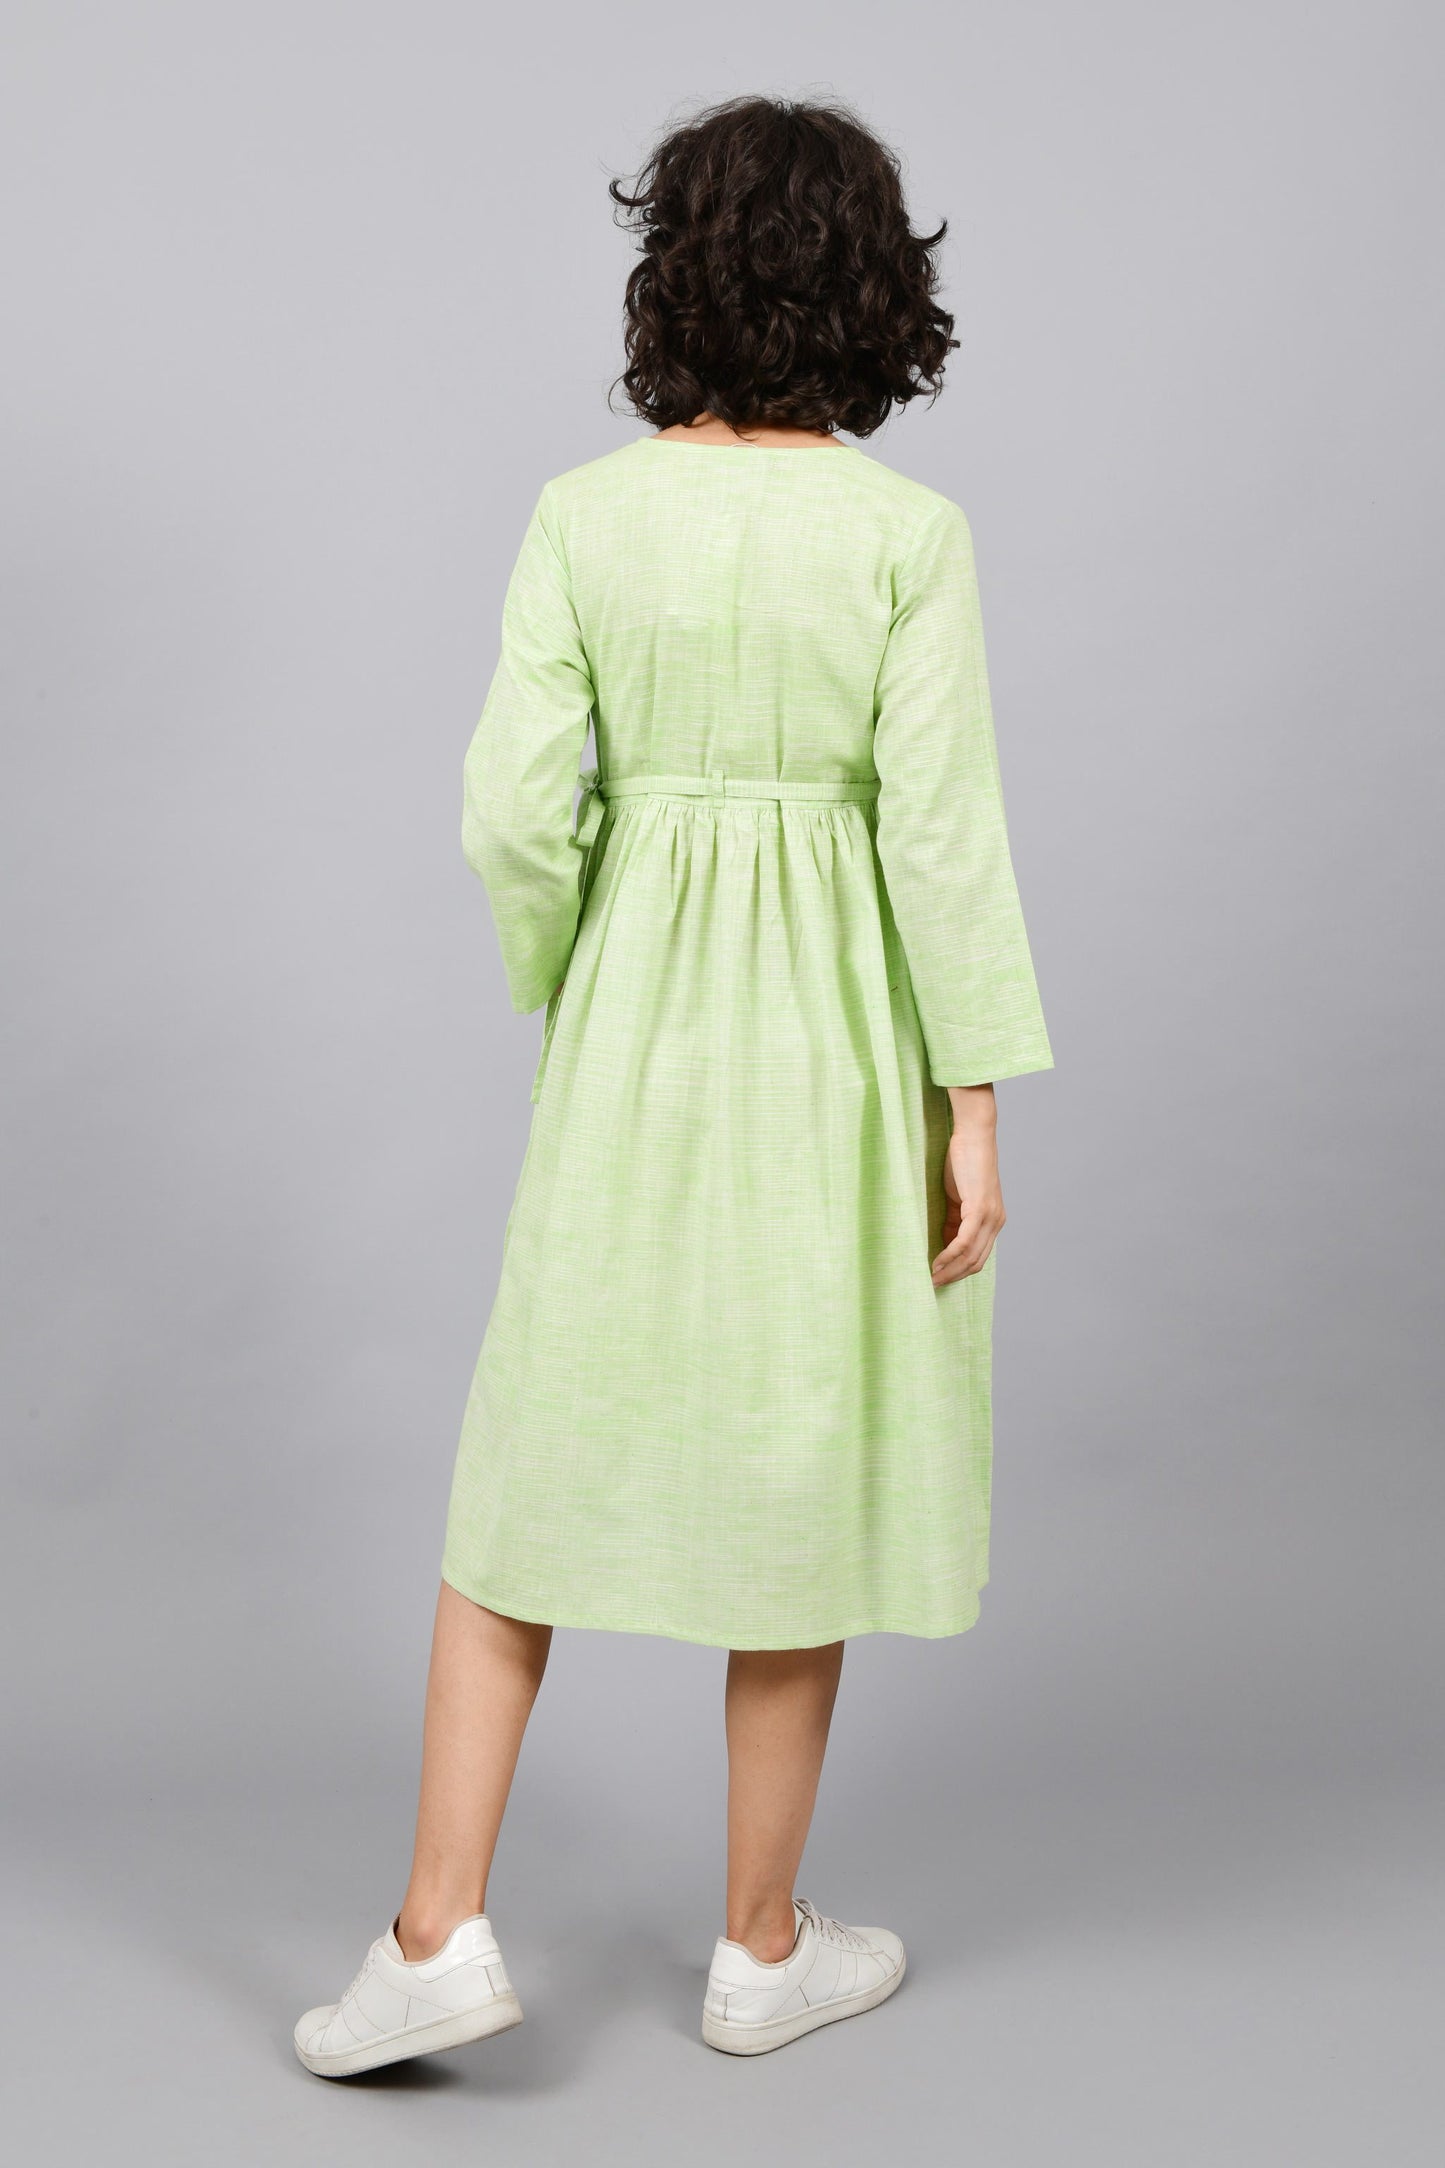 back of a model wearing an angrakha dress kurta in green and white space dyed fine handspun handwoven khadi cotton from west bengalv